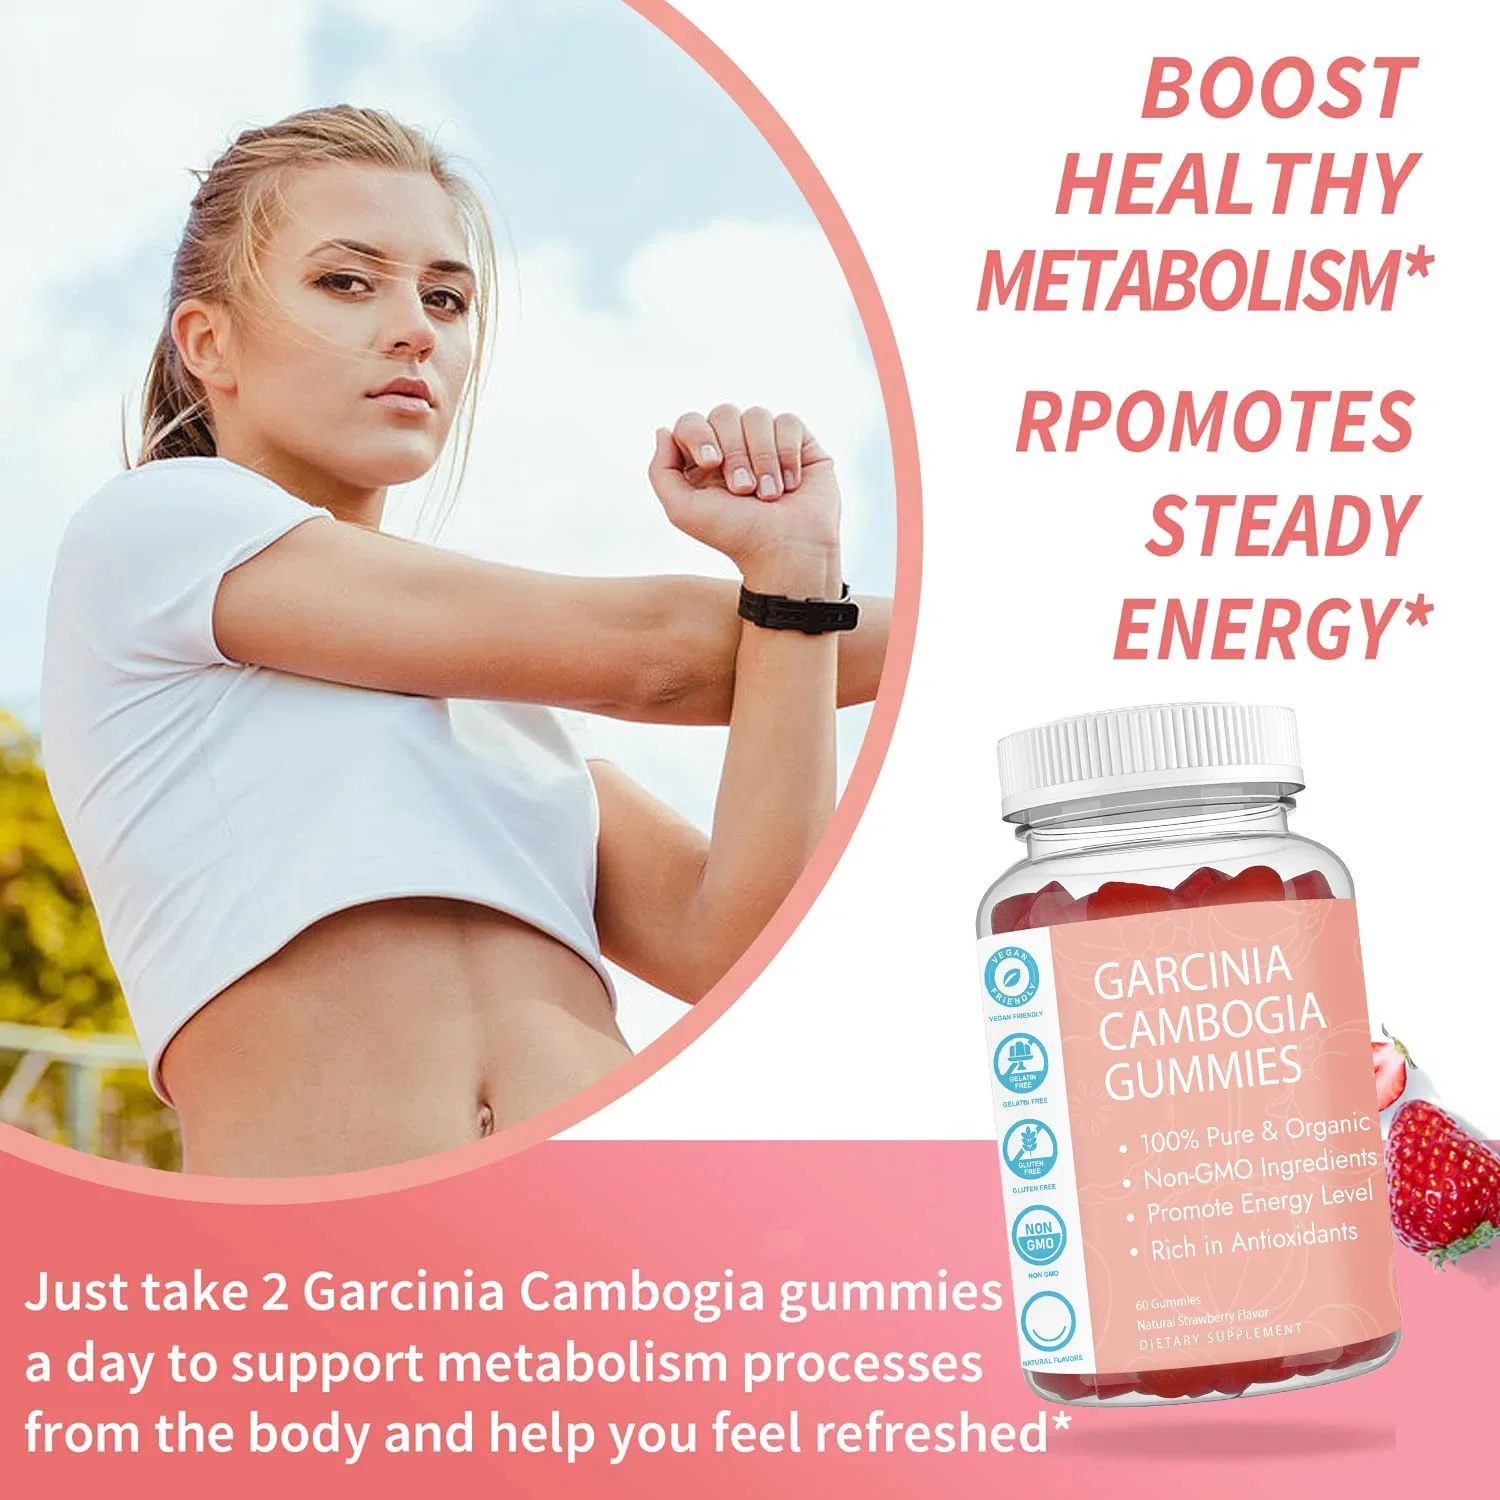 

1 bottle Strawberry-flavored Garcinia fudge can control appetite, burn fat, reduce fat and control weight through metabolism